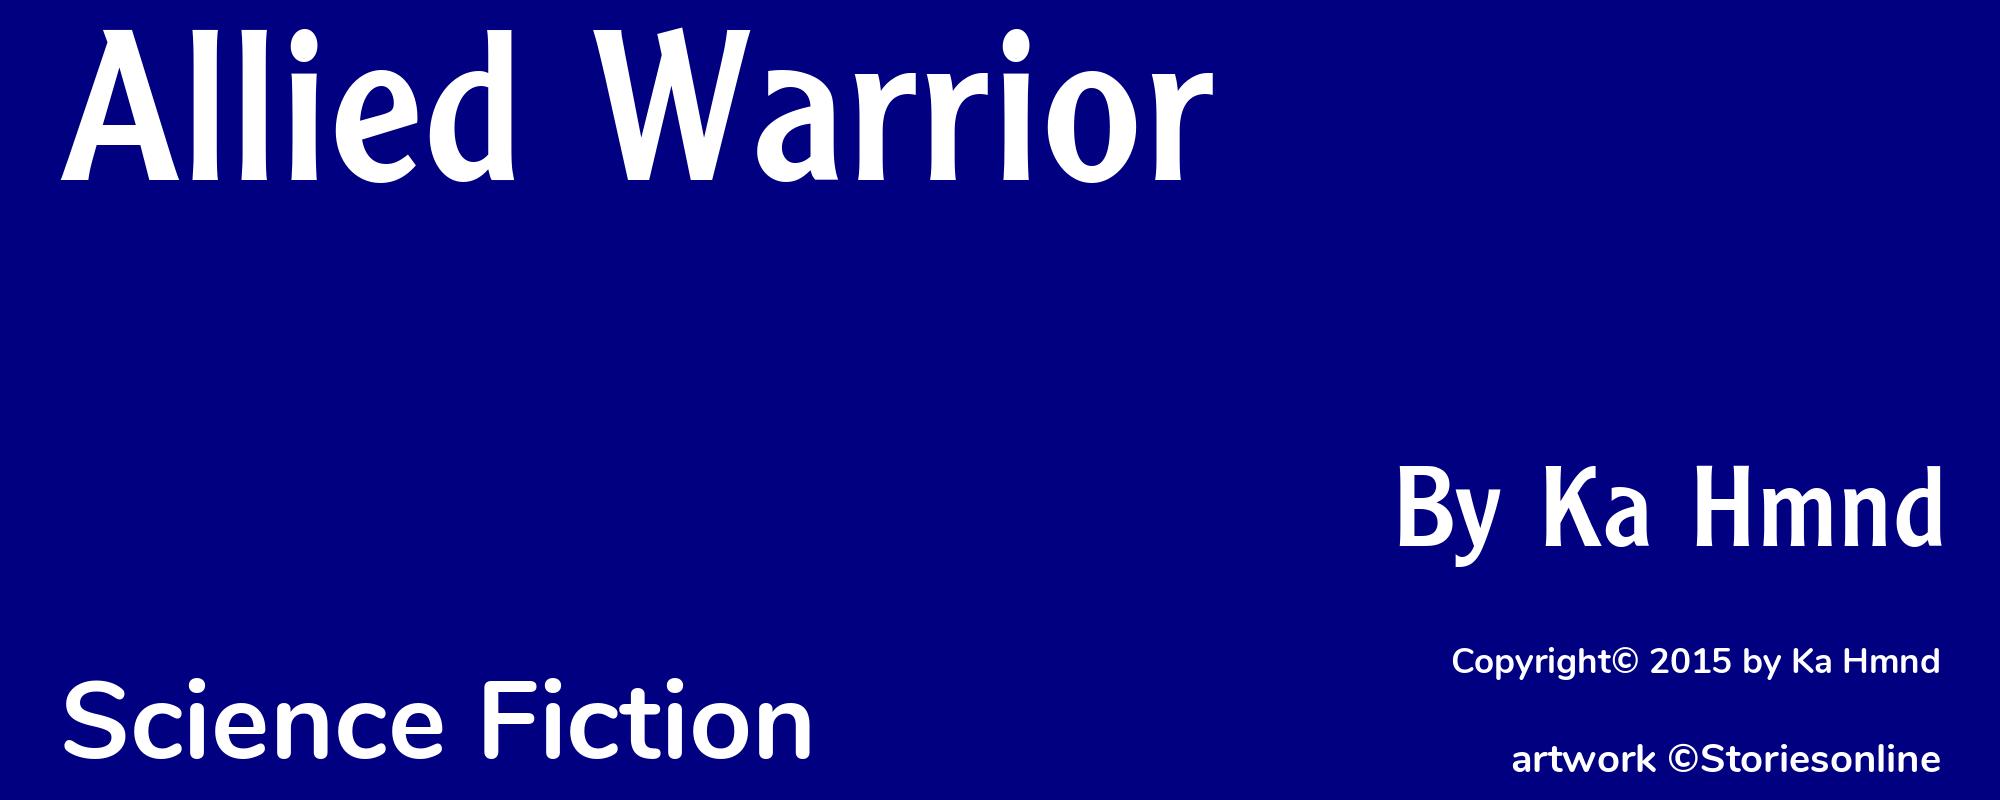 Allied Warrior - Cover